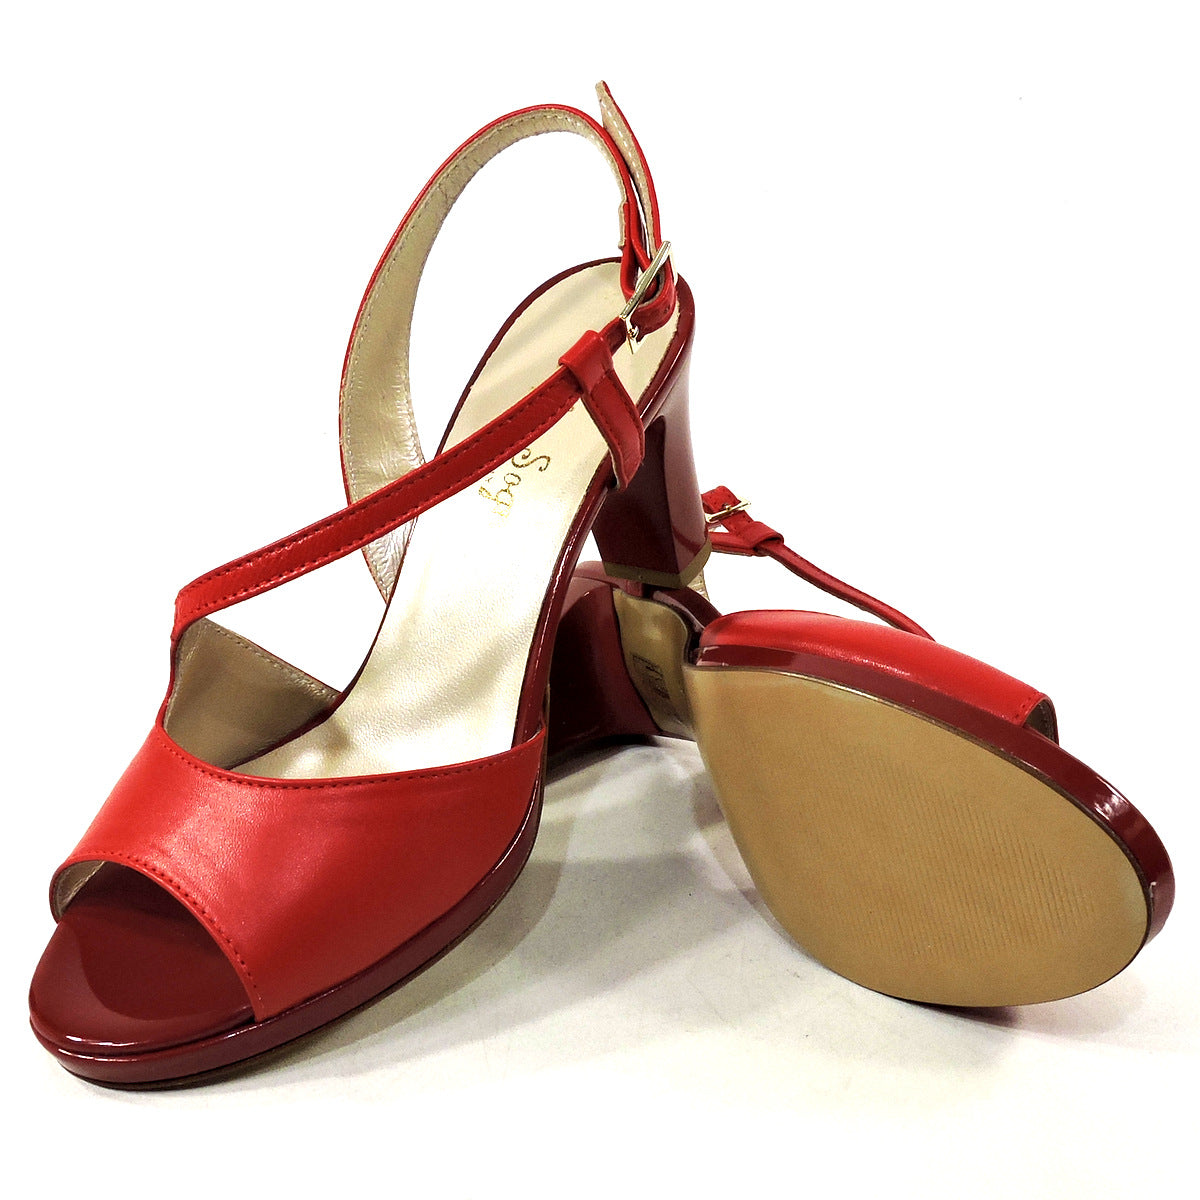 SOFFICE SOGNO 🇮🇹 WOMEN'S RED LEATHER SUMMER SANDALS